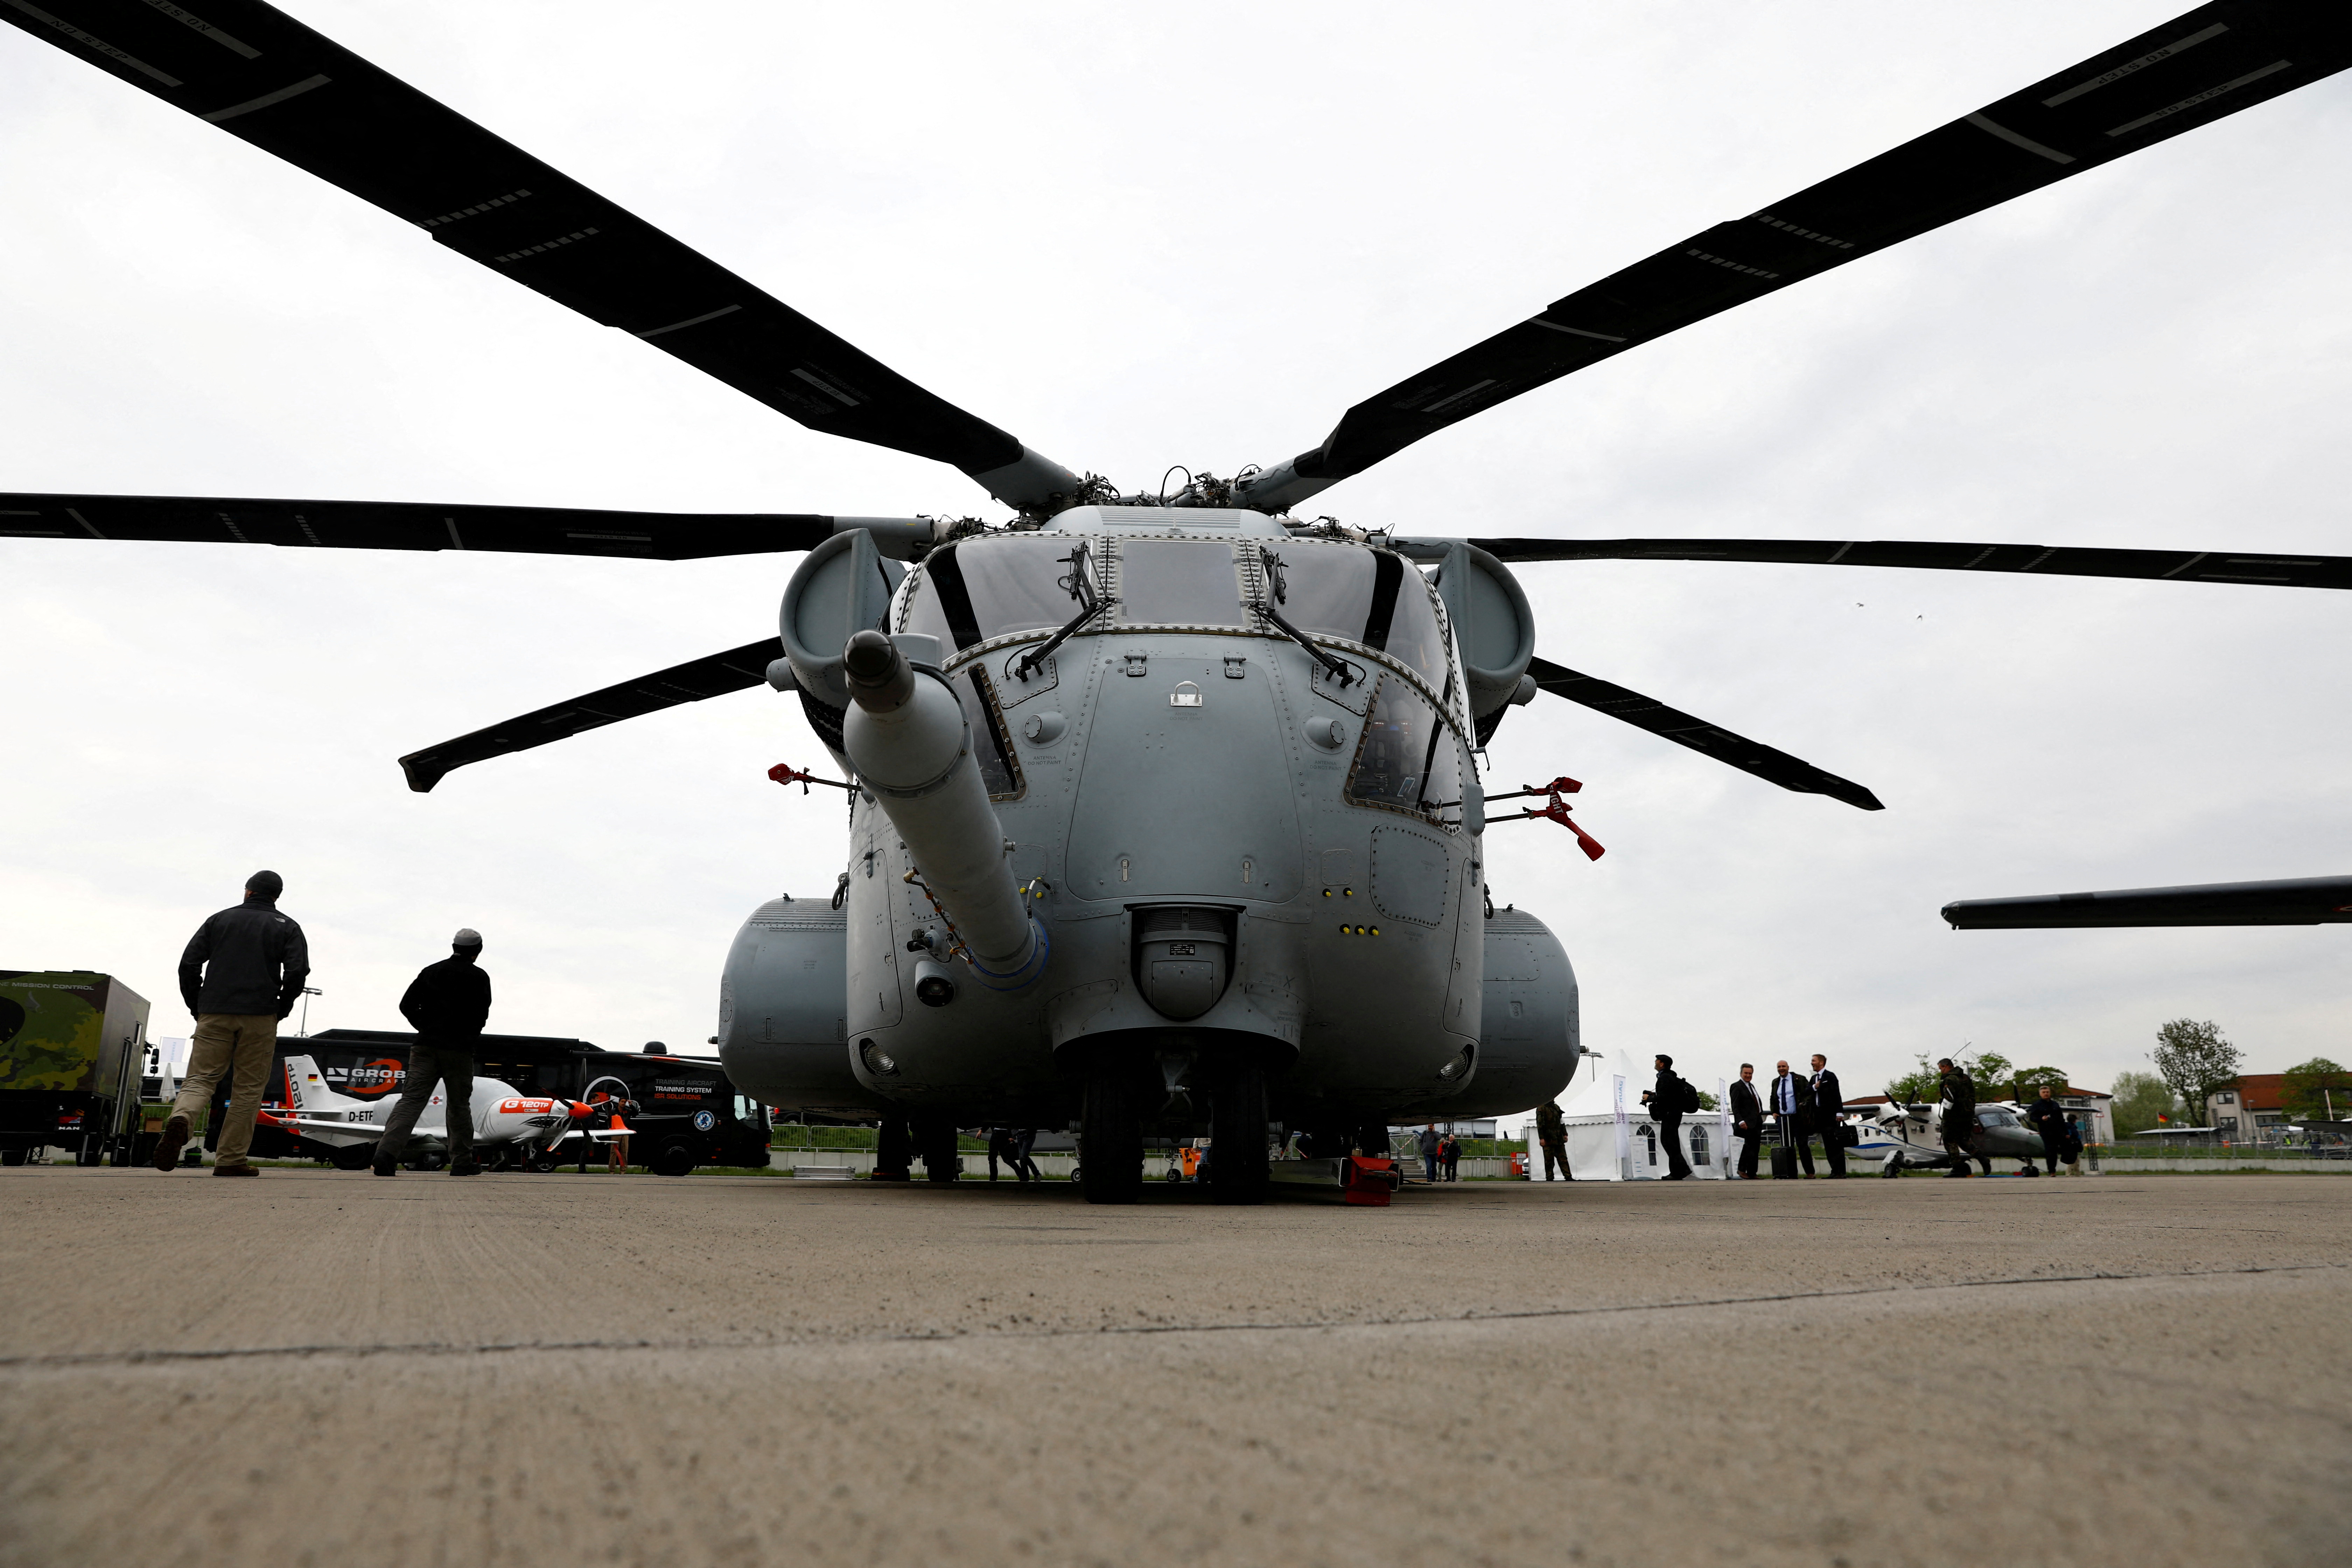 A Sikorsky CH-53K King Stallion helicopter is seen at the ILA Air Show in Berlin